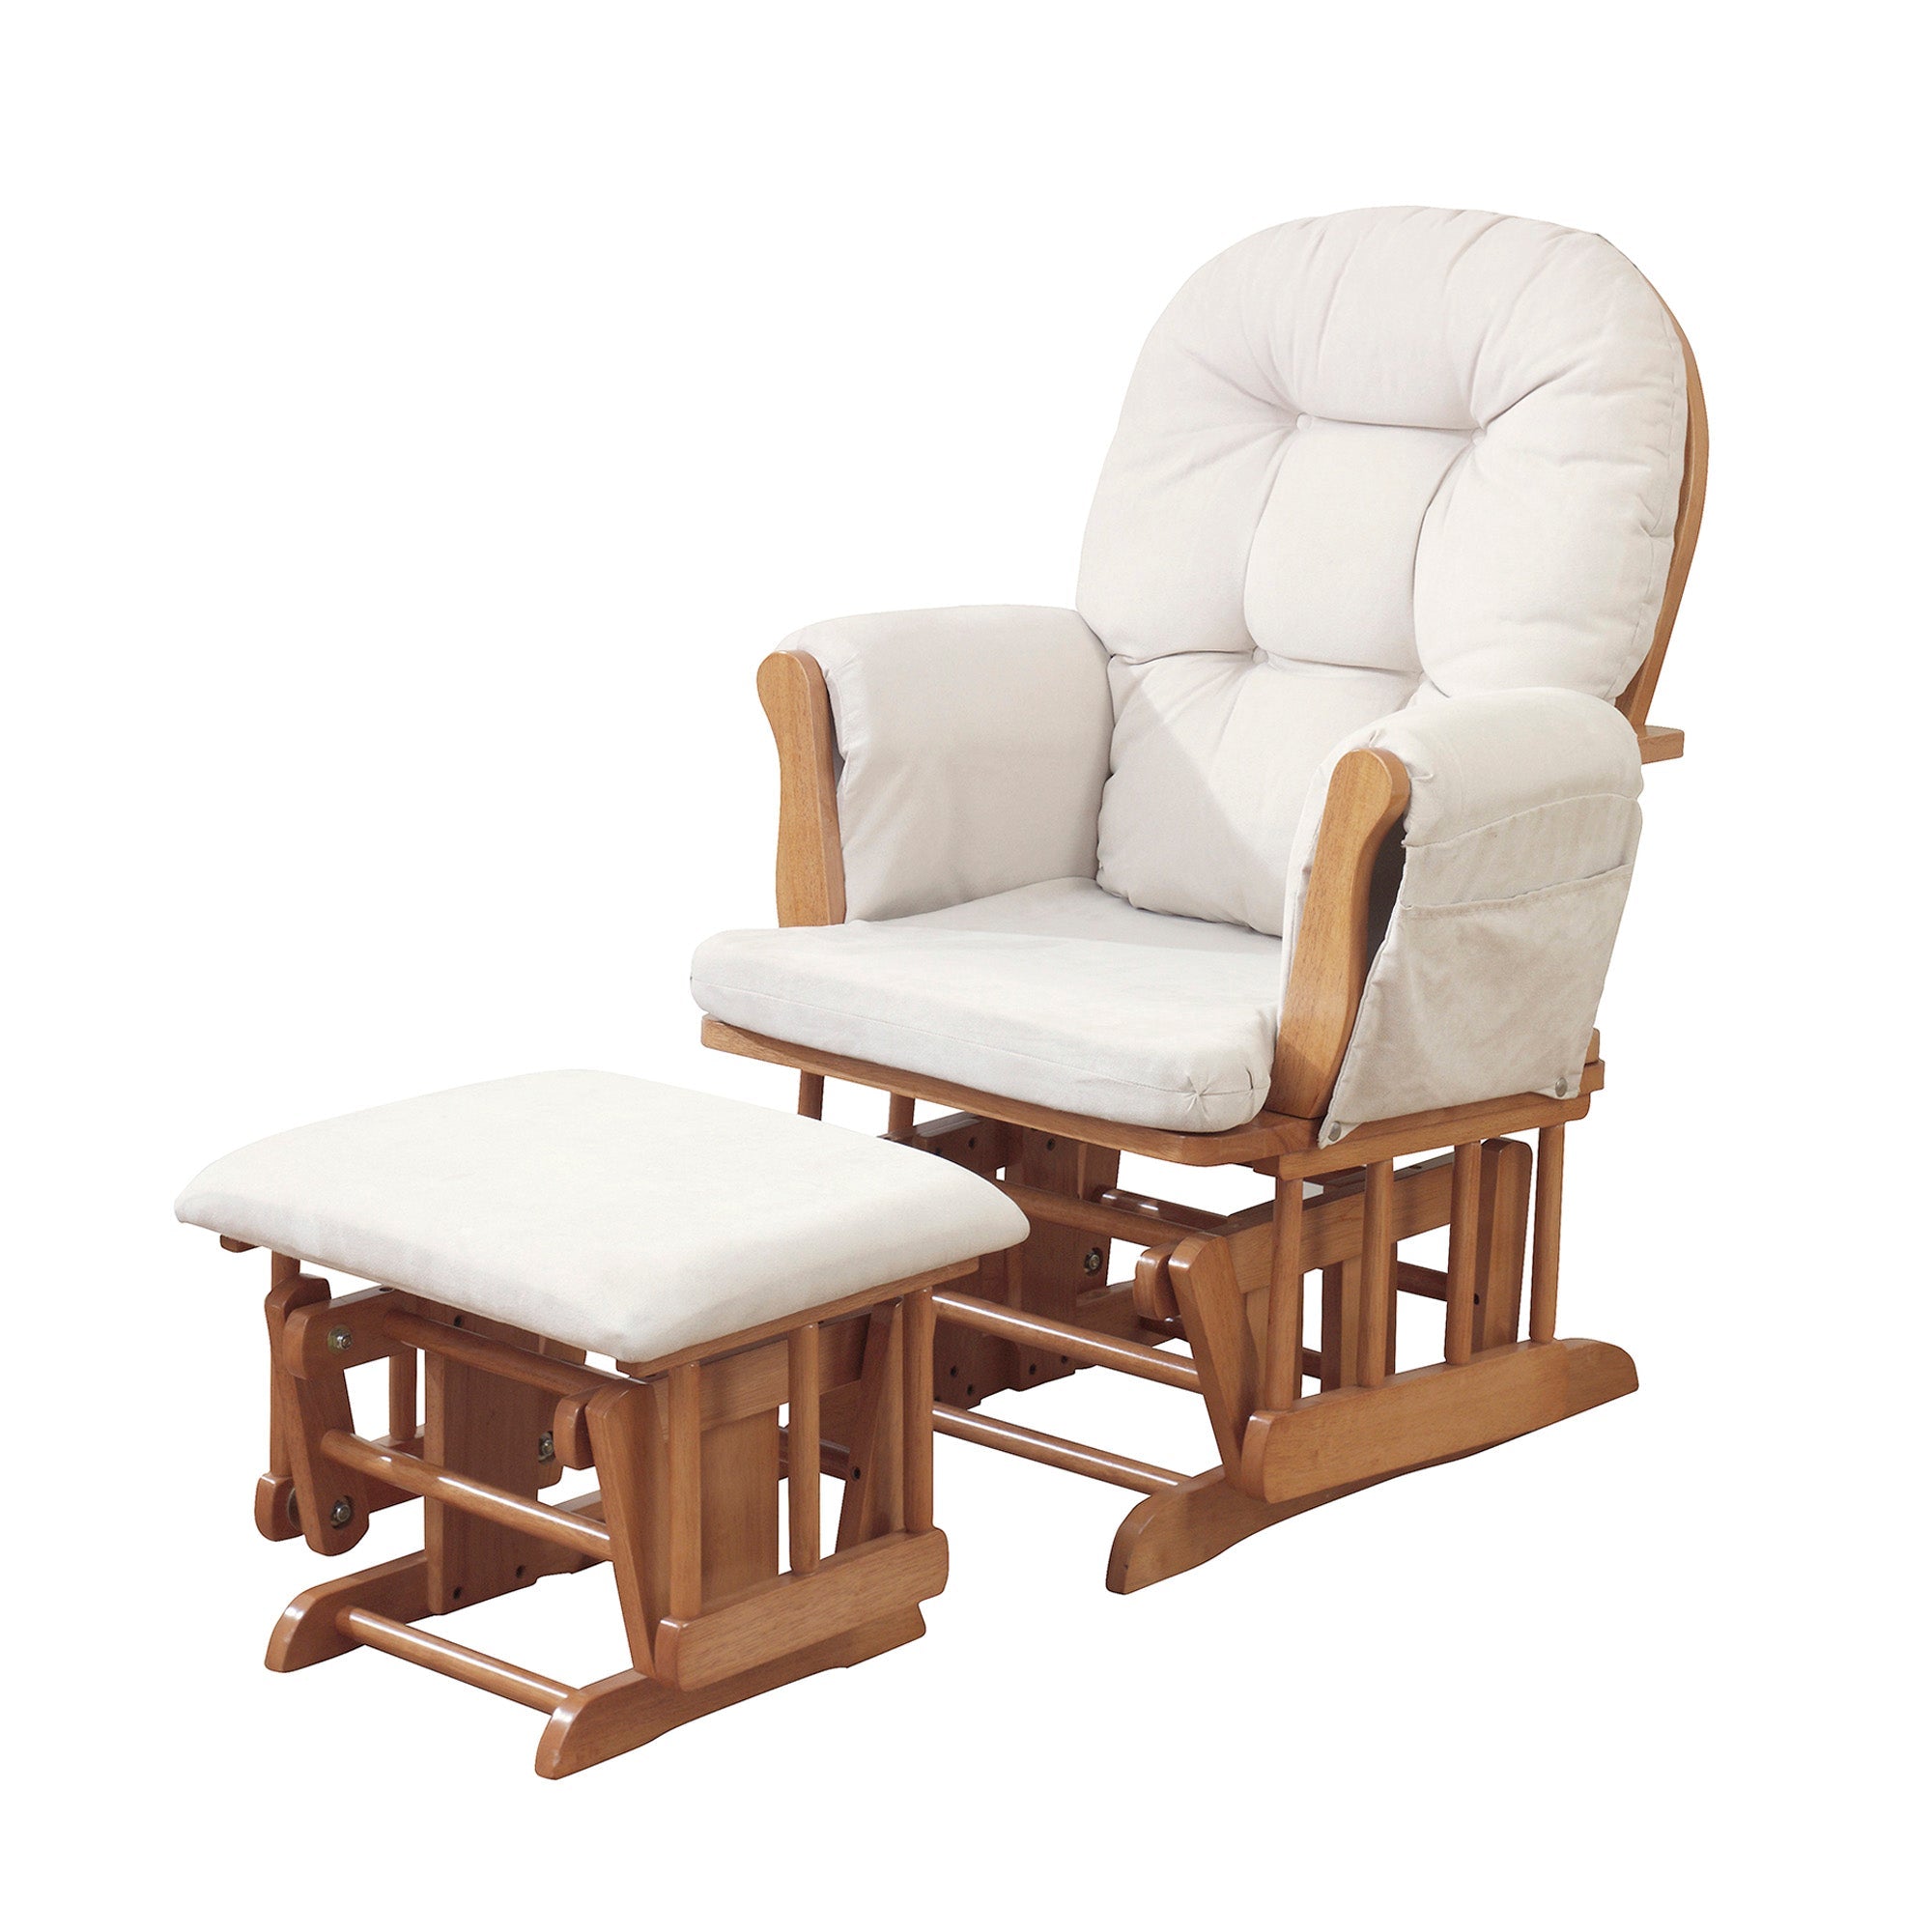 Haywood Non-Reclining Nursing Chair and Footstool White and Beige